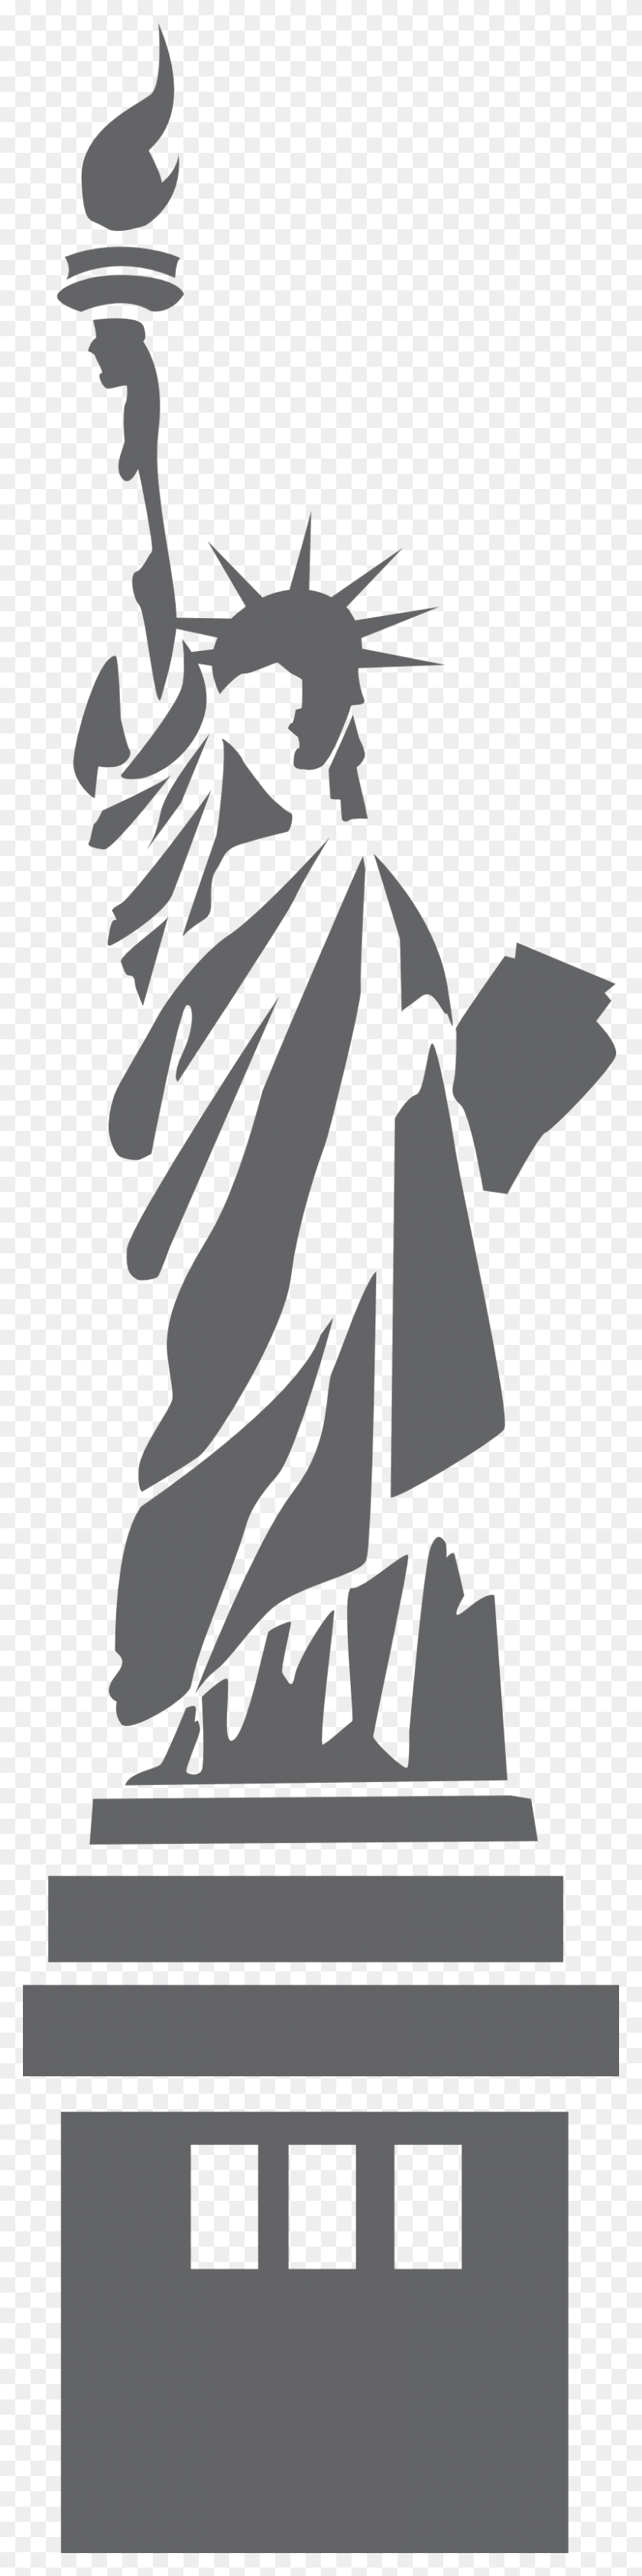 800x3396 Scroll Saw Patterns Stencil Patterns Silhouette Cameo Statue Of Liberty Transparent Background, Clothing, Apparel, Manga HD PNG Download